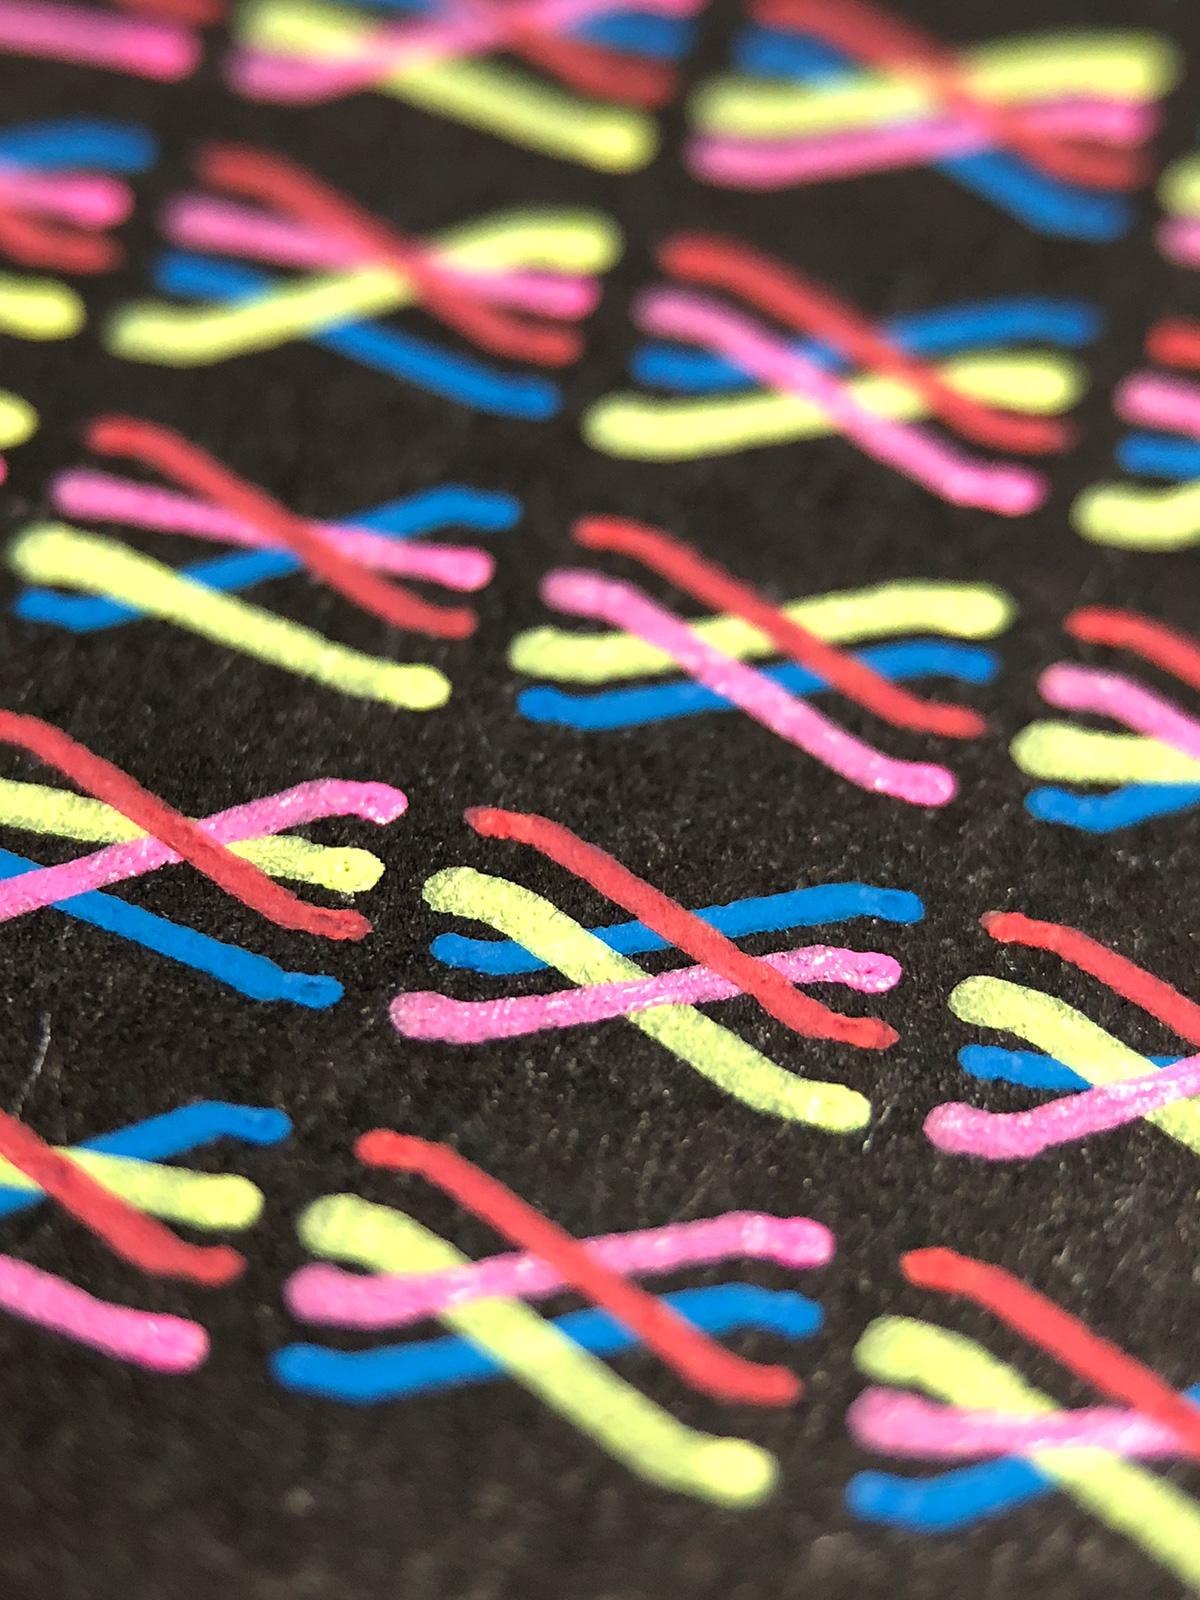 An extreme close-up of one wire group, showing how the gel pens are able to layer colour over previous ones